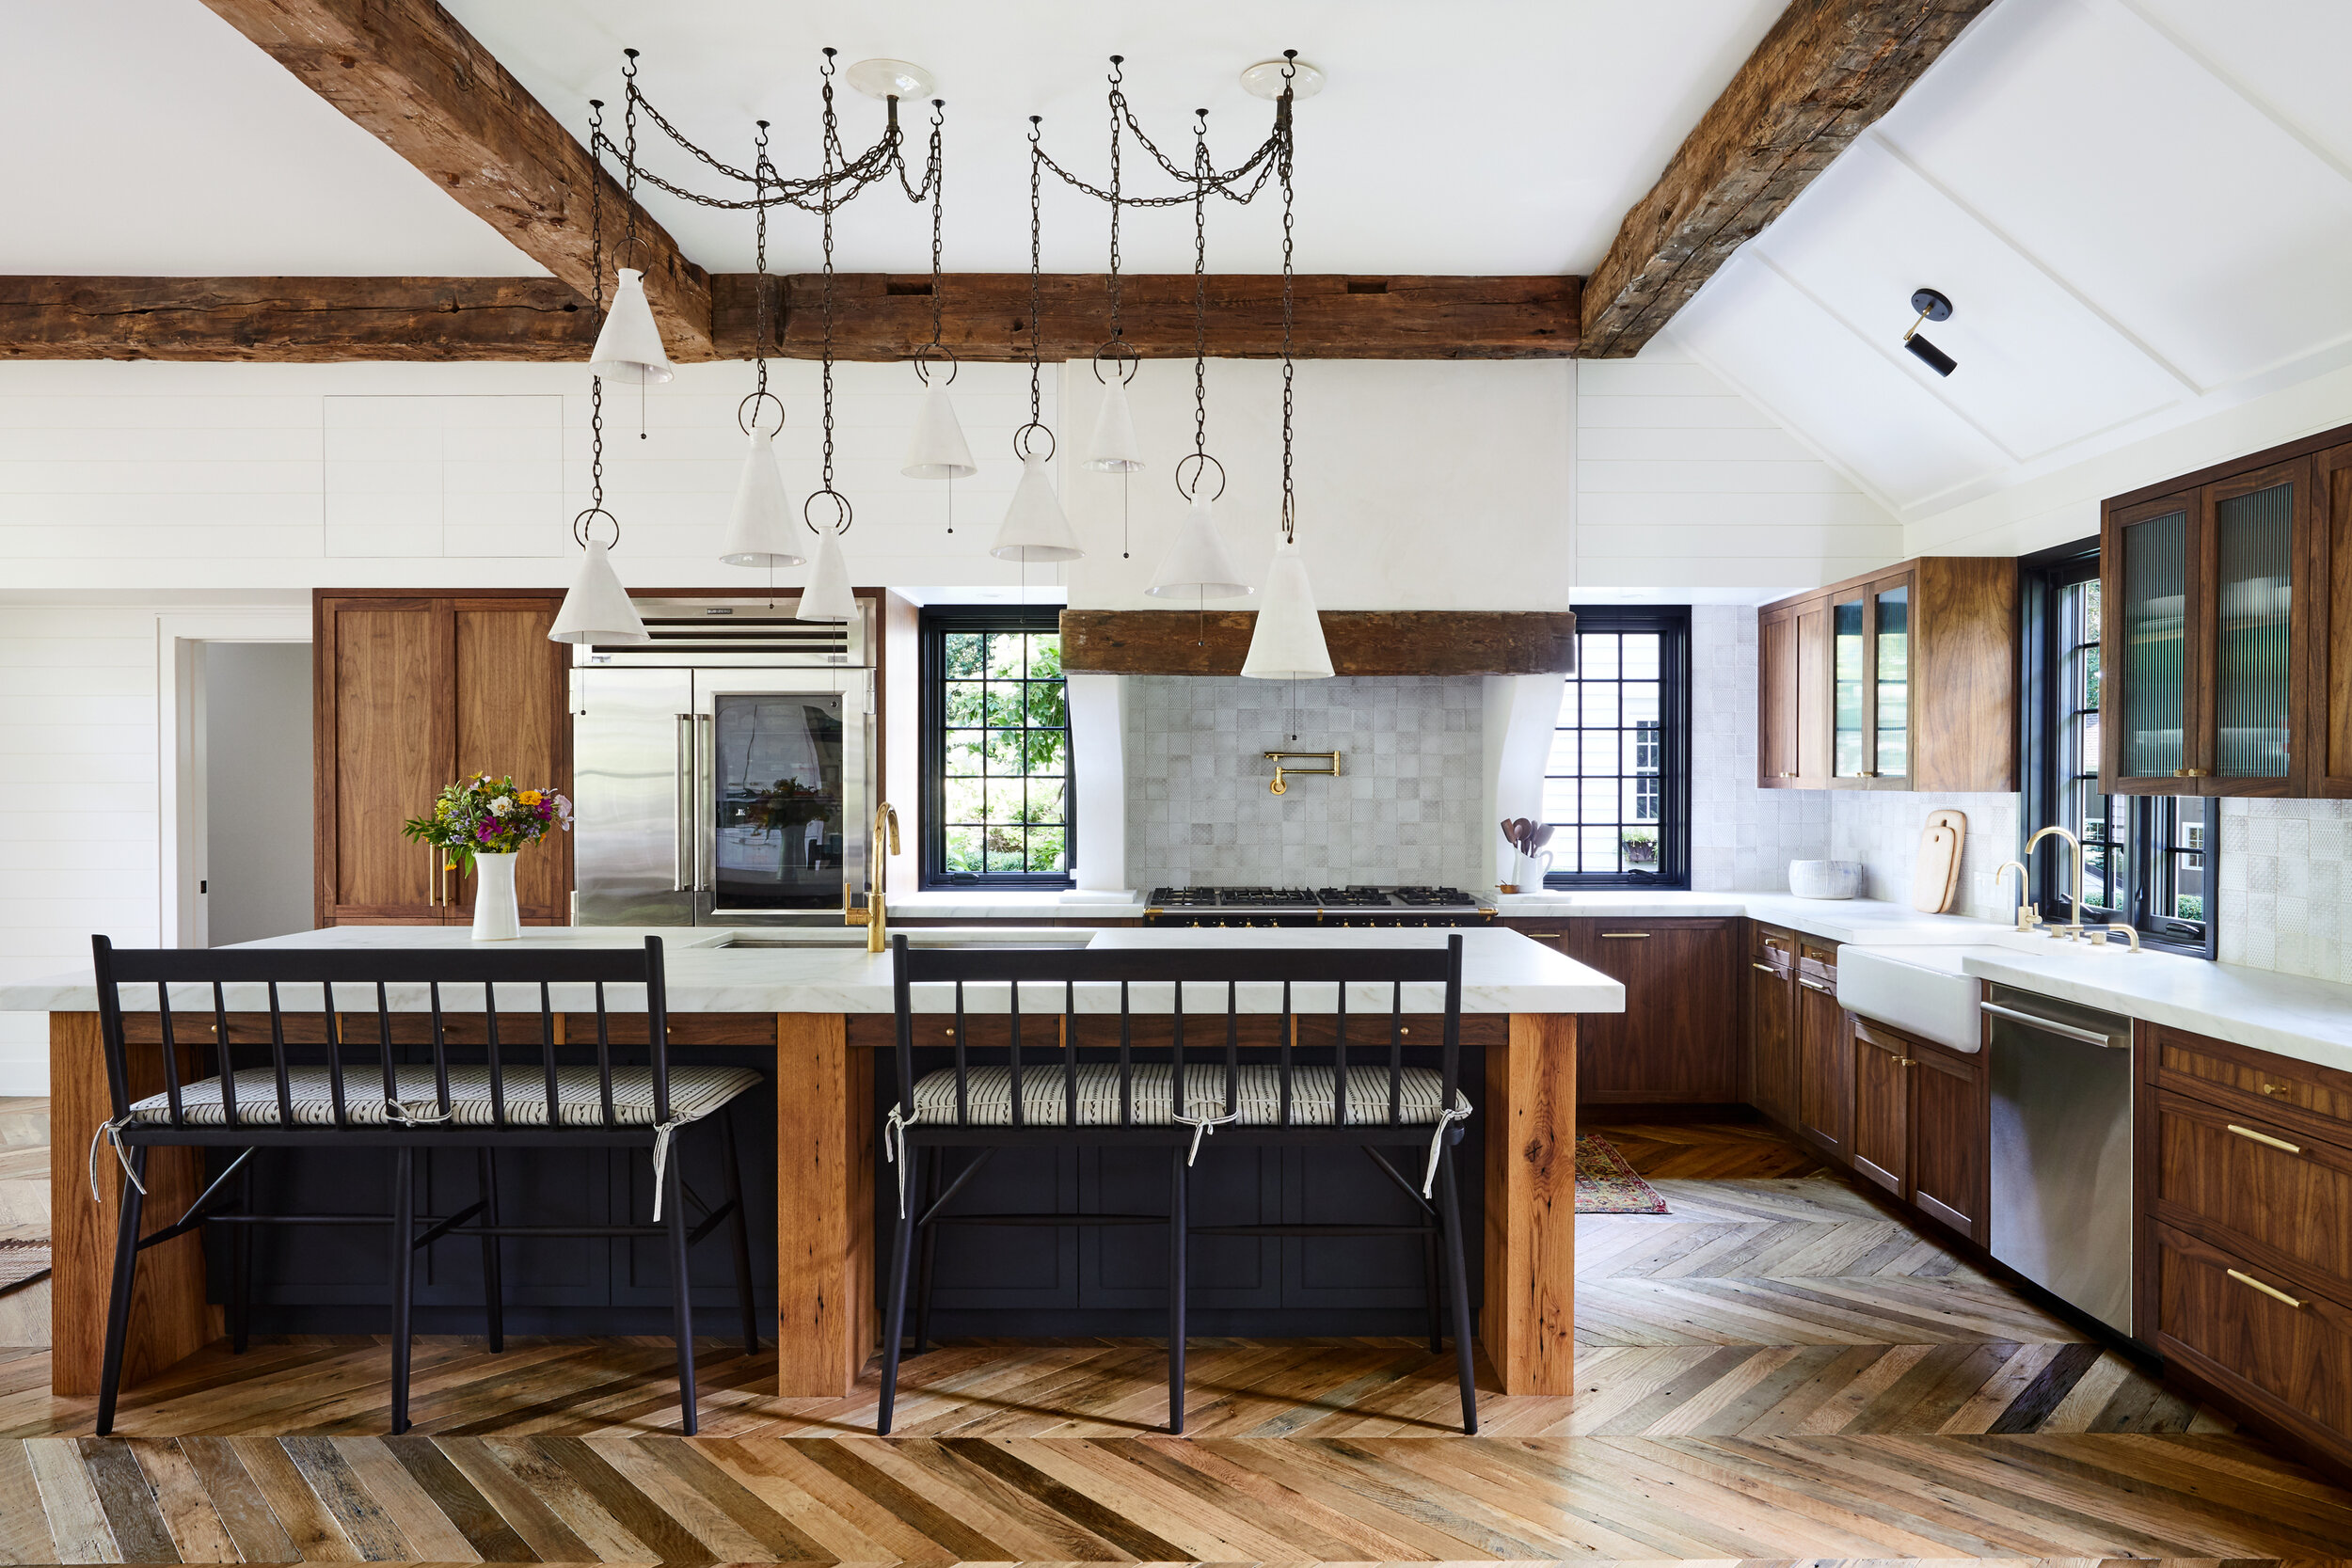 Lords_Hwy_Main_House_Kitchen_003.jpg